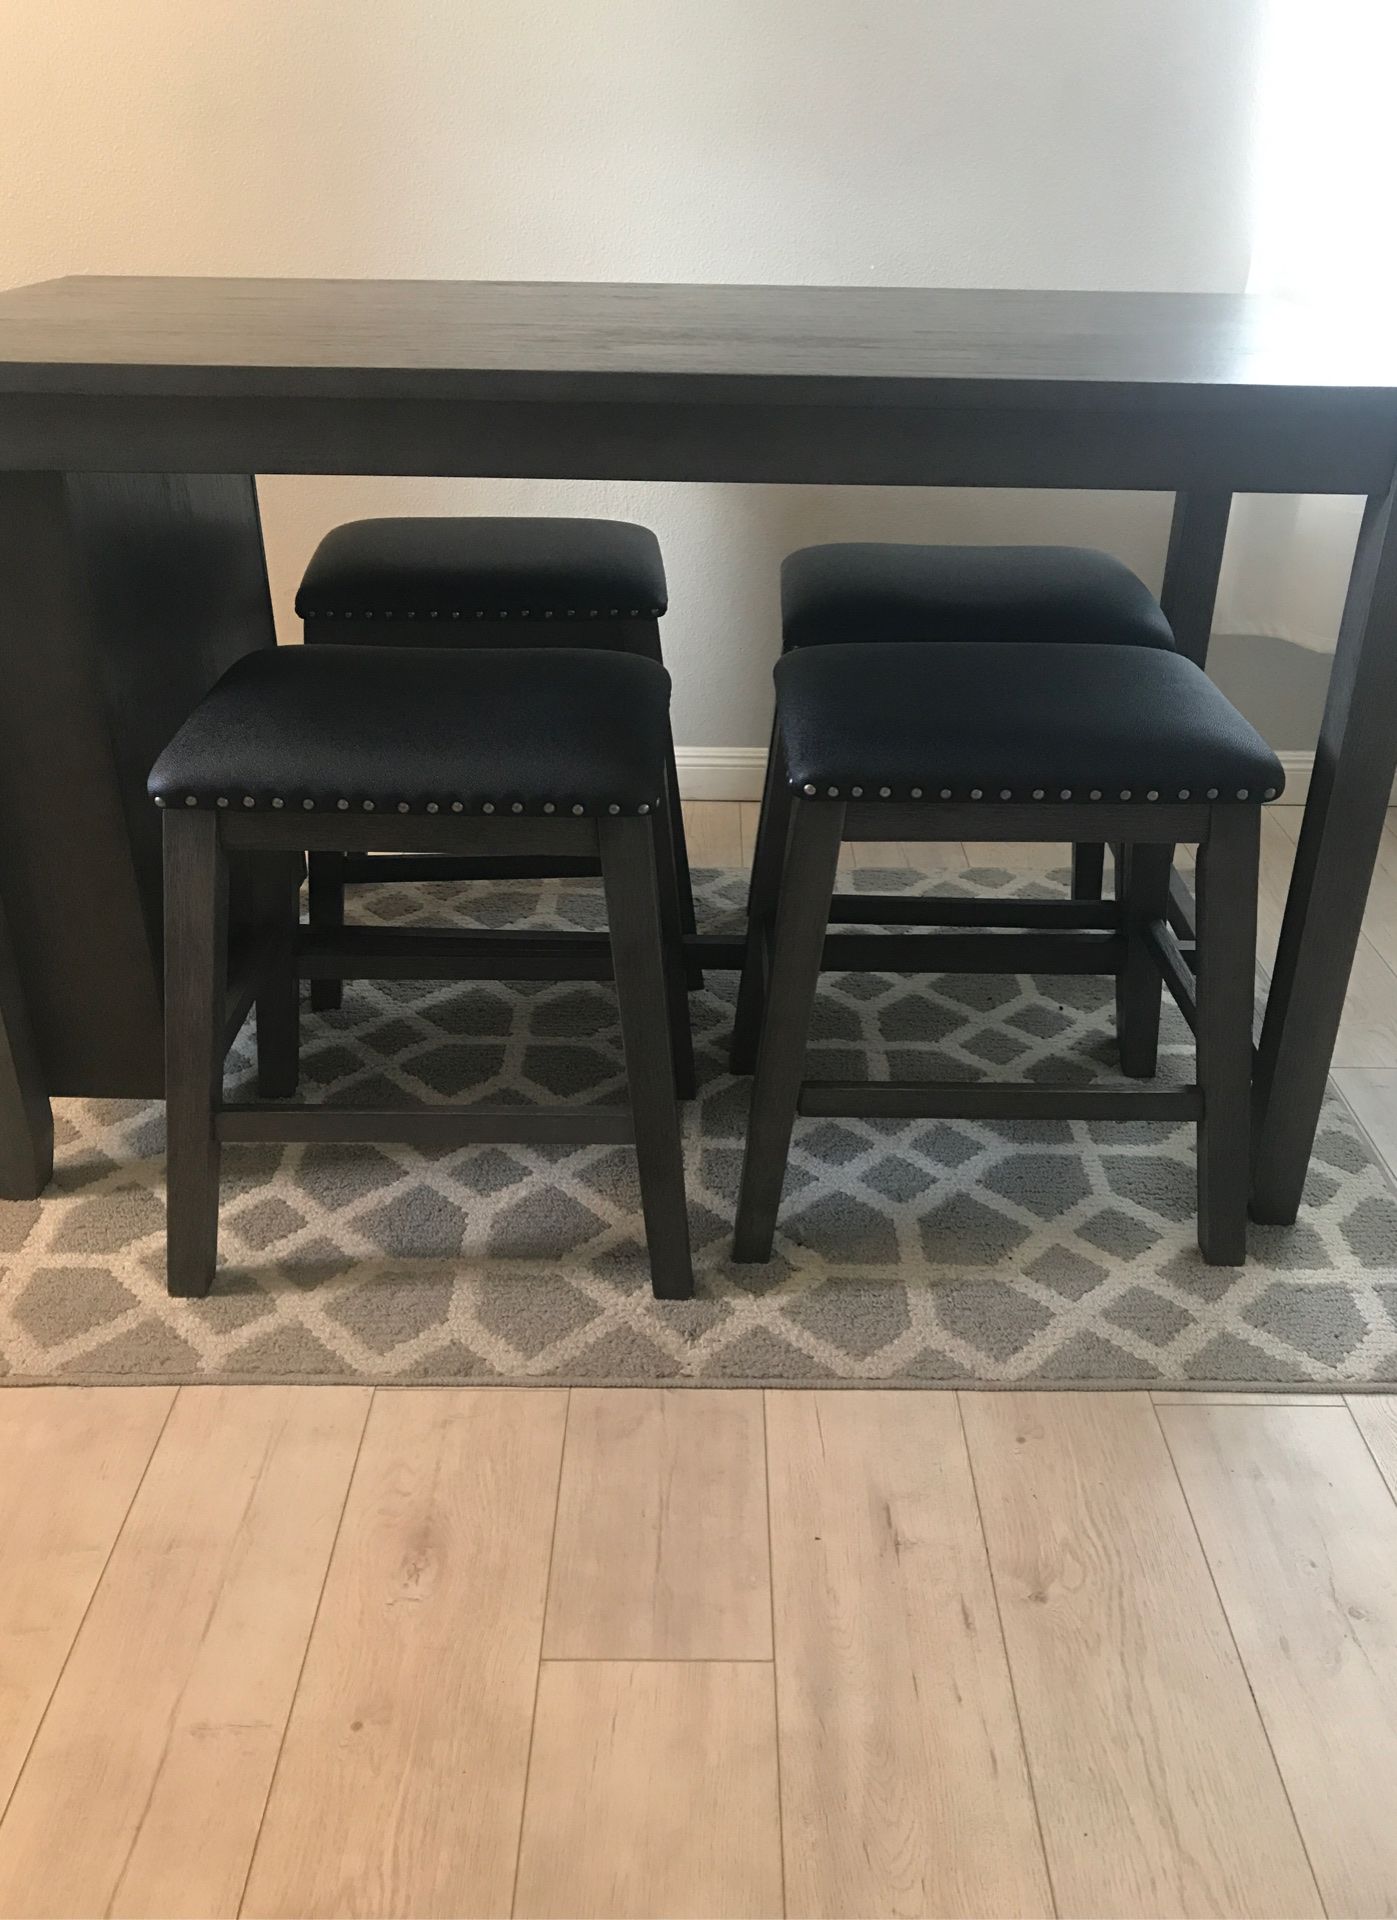 Counter height table with 4 bar stools (Last day to pick up is 2/18/20)